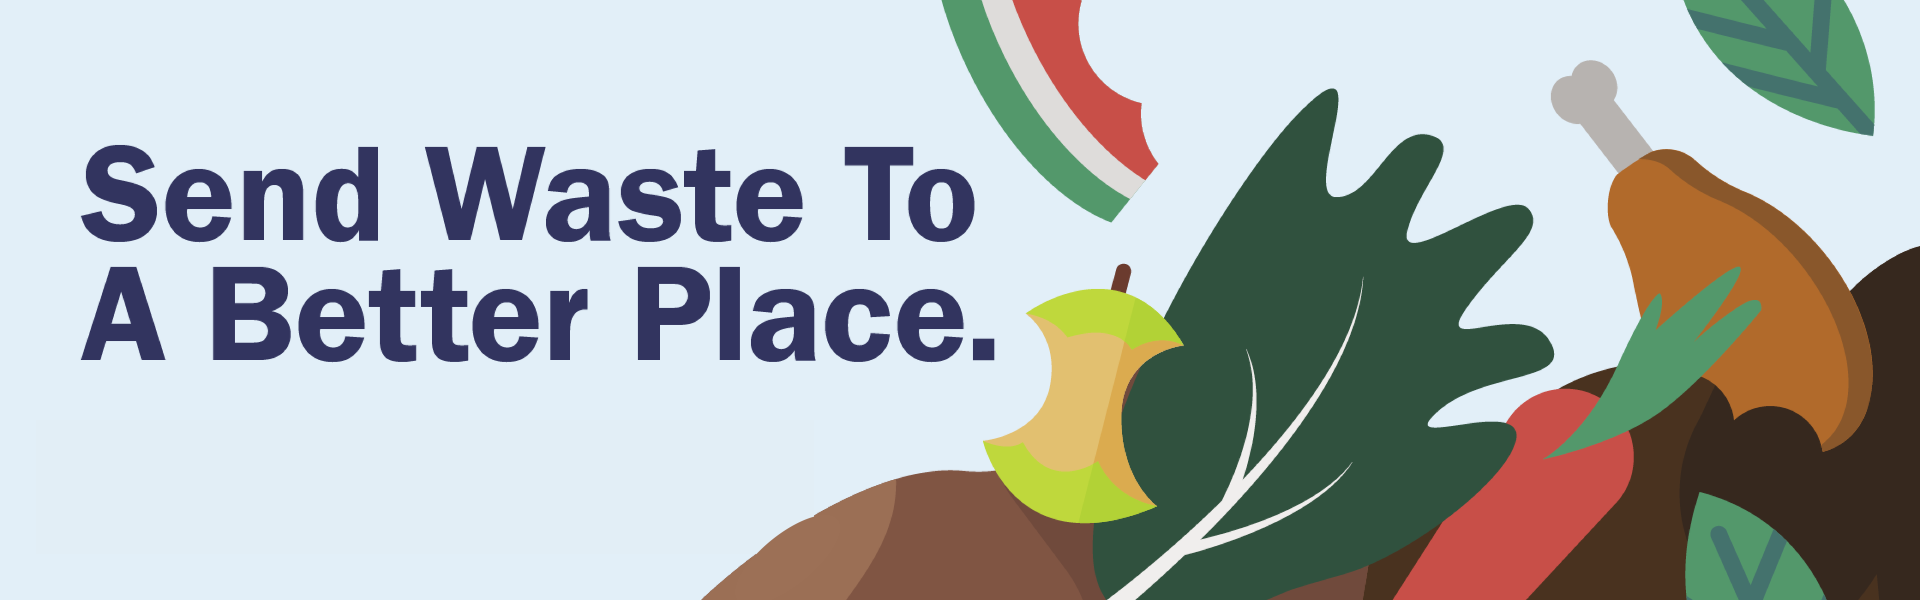 Send Waste to a Better Place Graphic